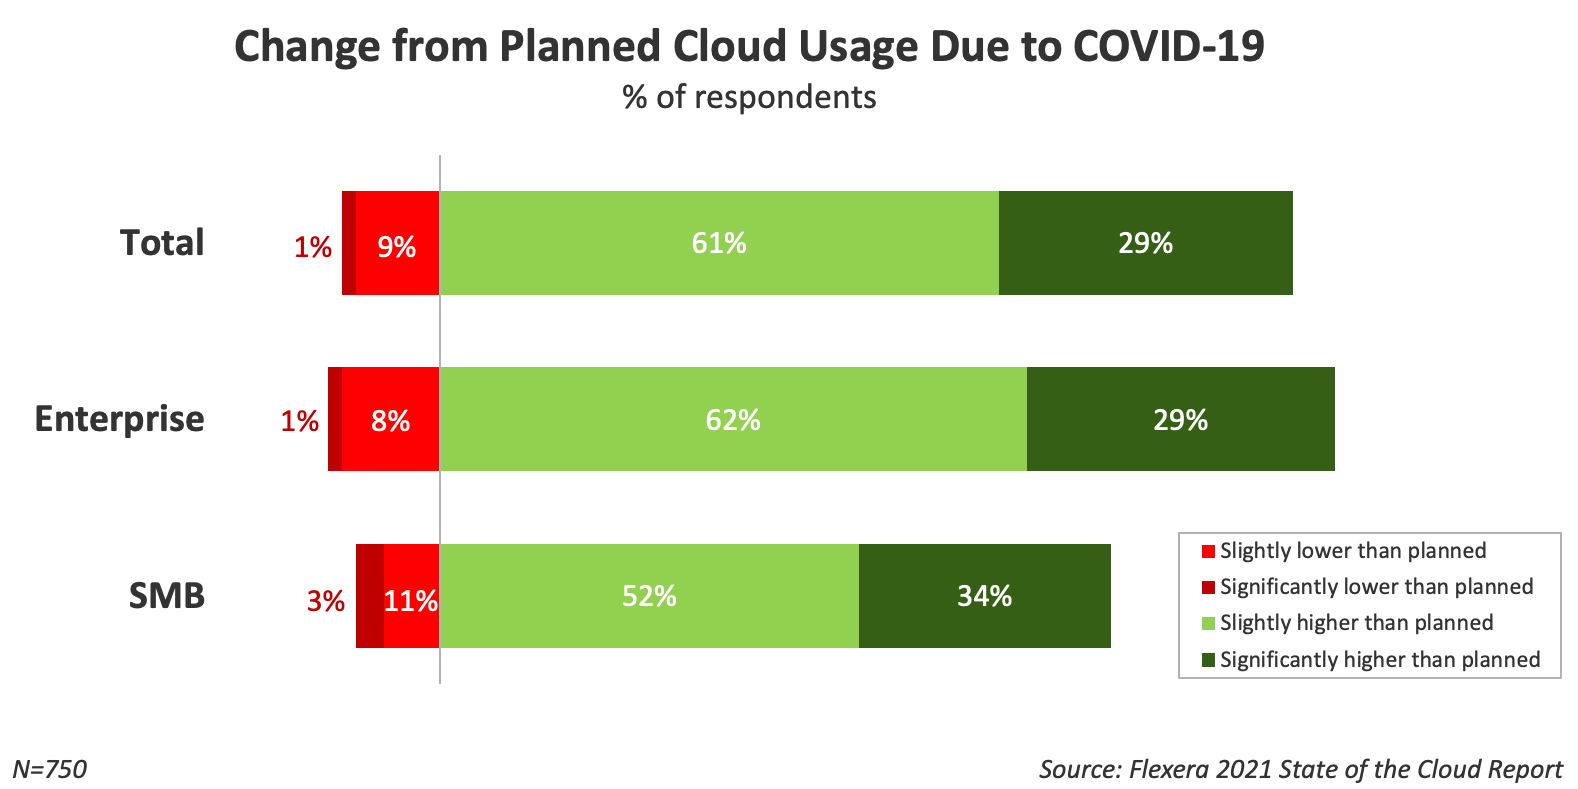 Change from planned cloud usage due to COVID-19